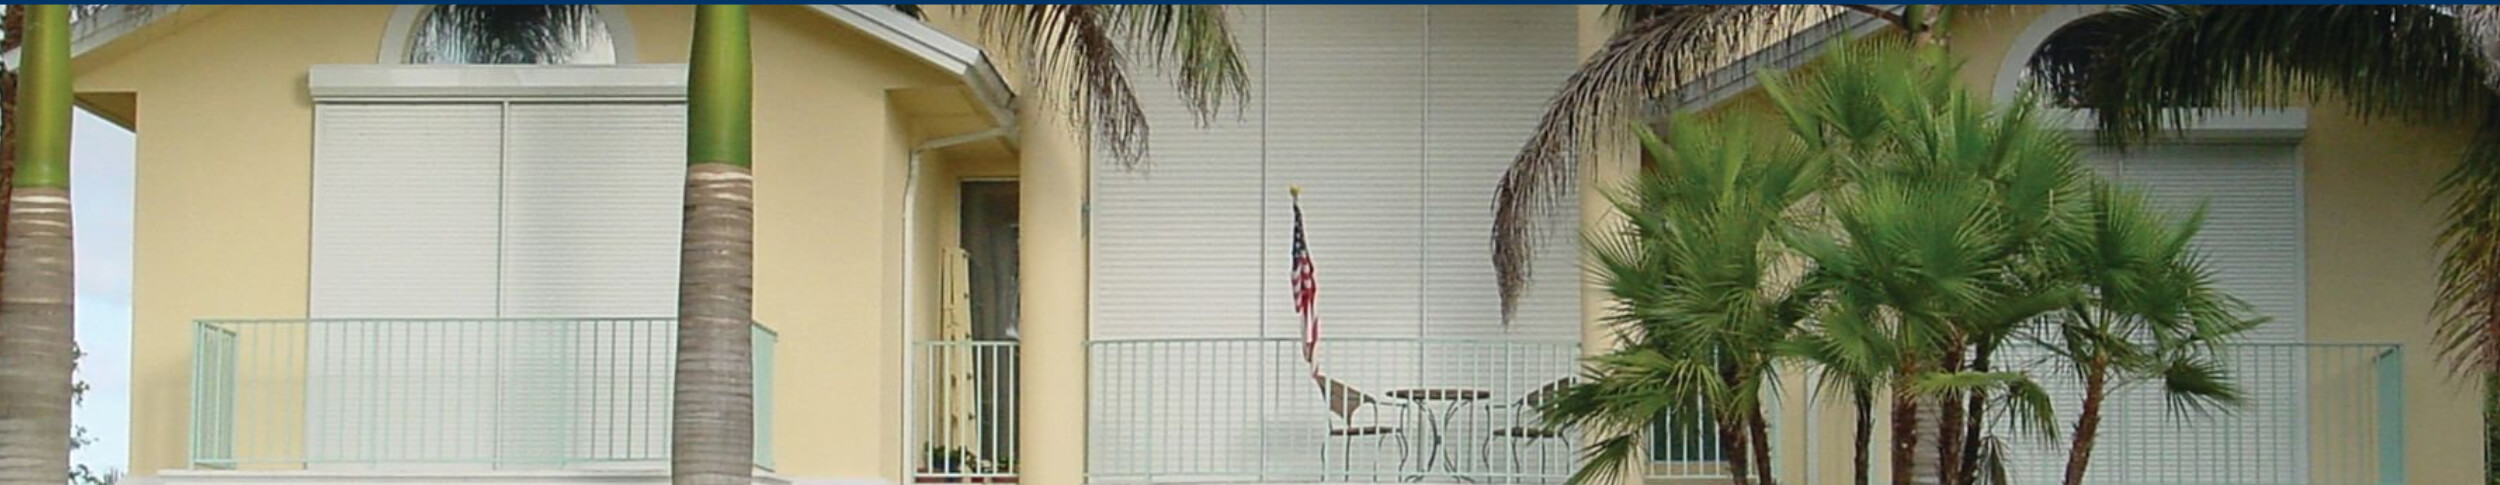 Roll Shutter Systems - Hurricane Products - American Shutter Systems A